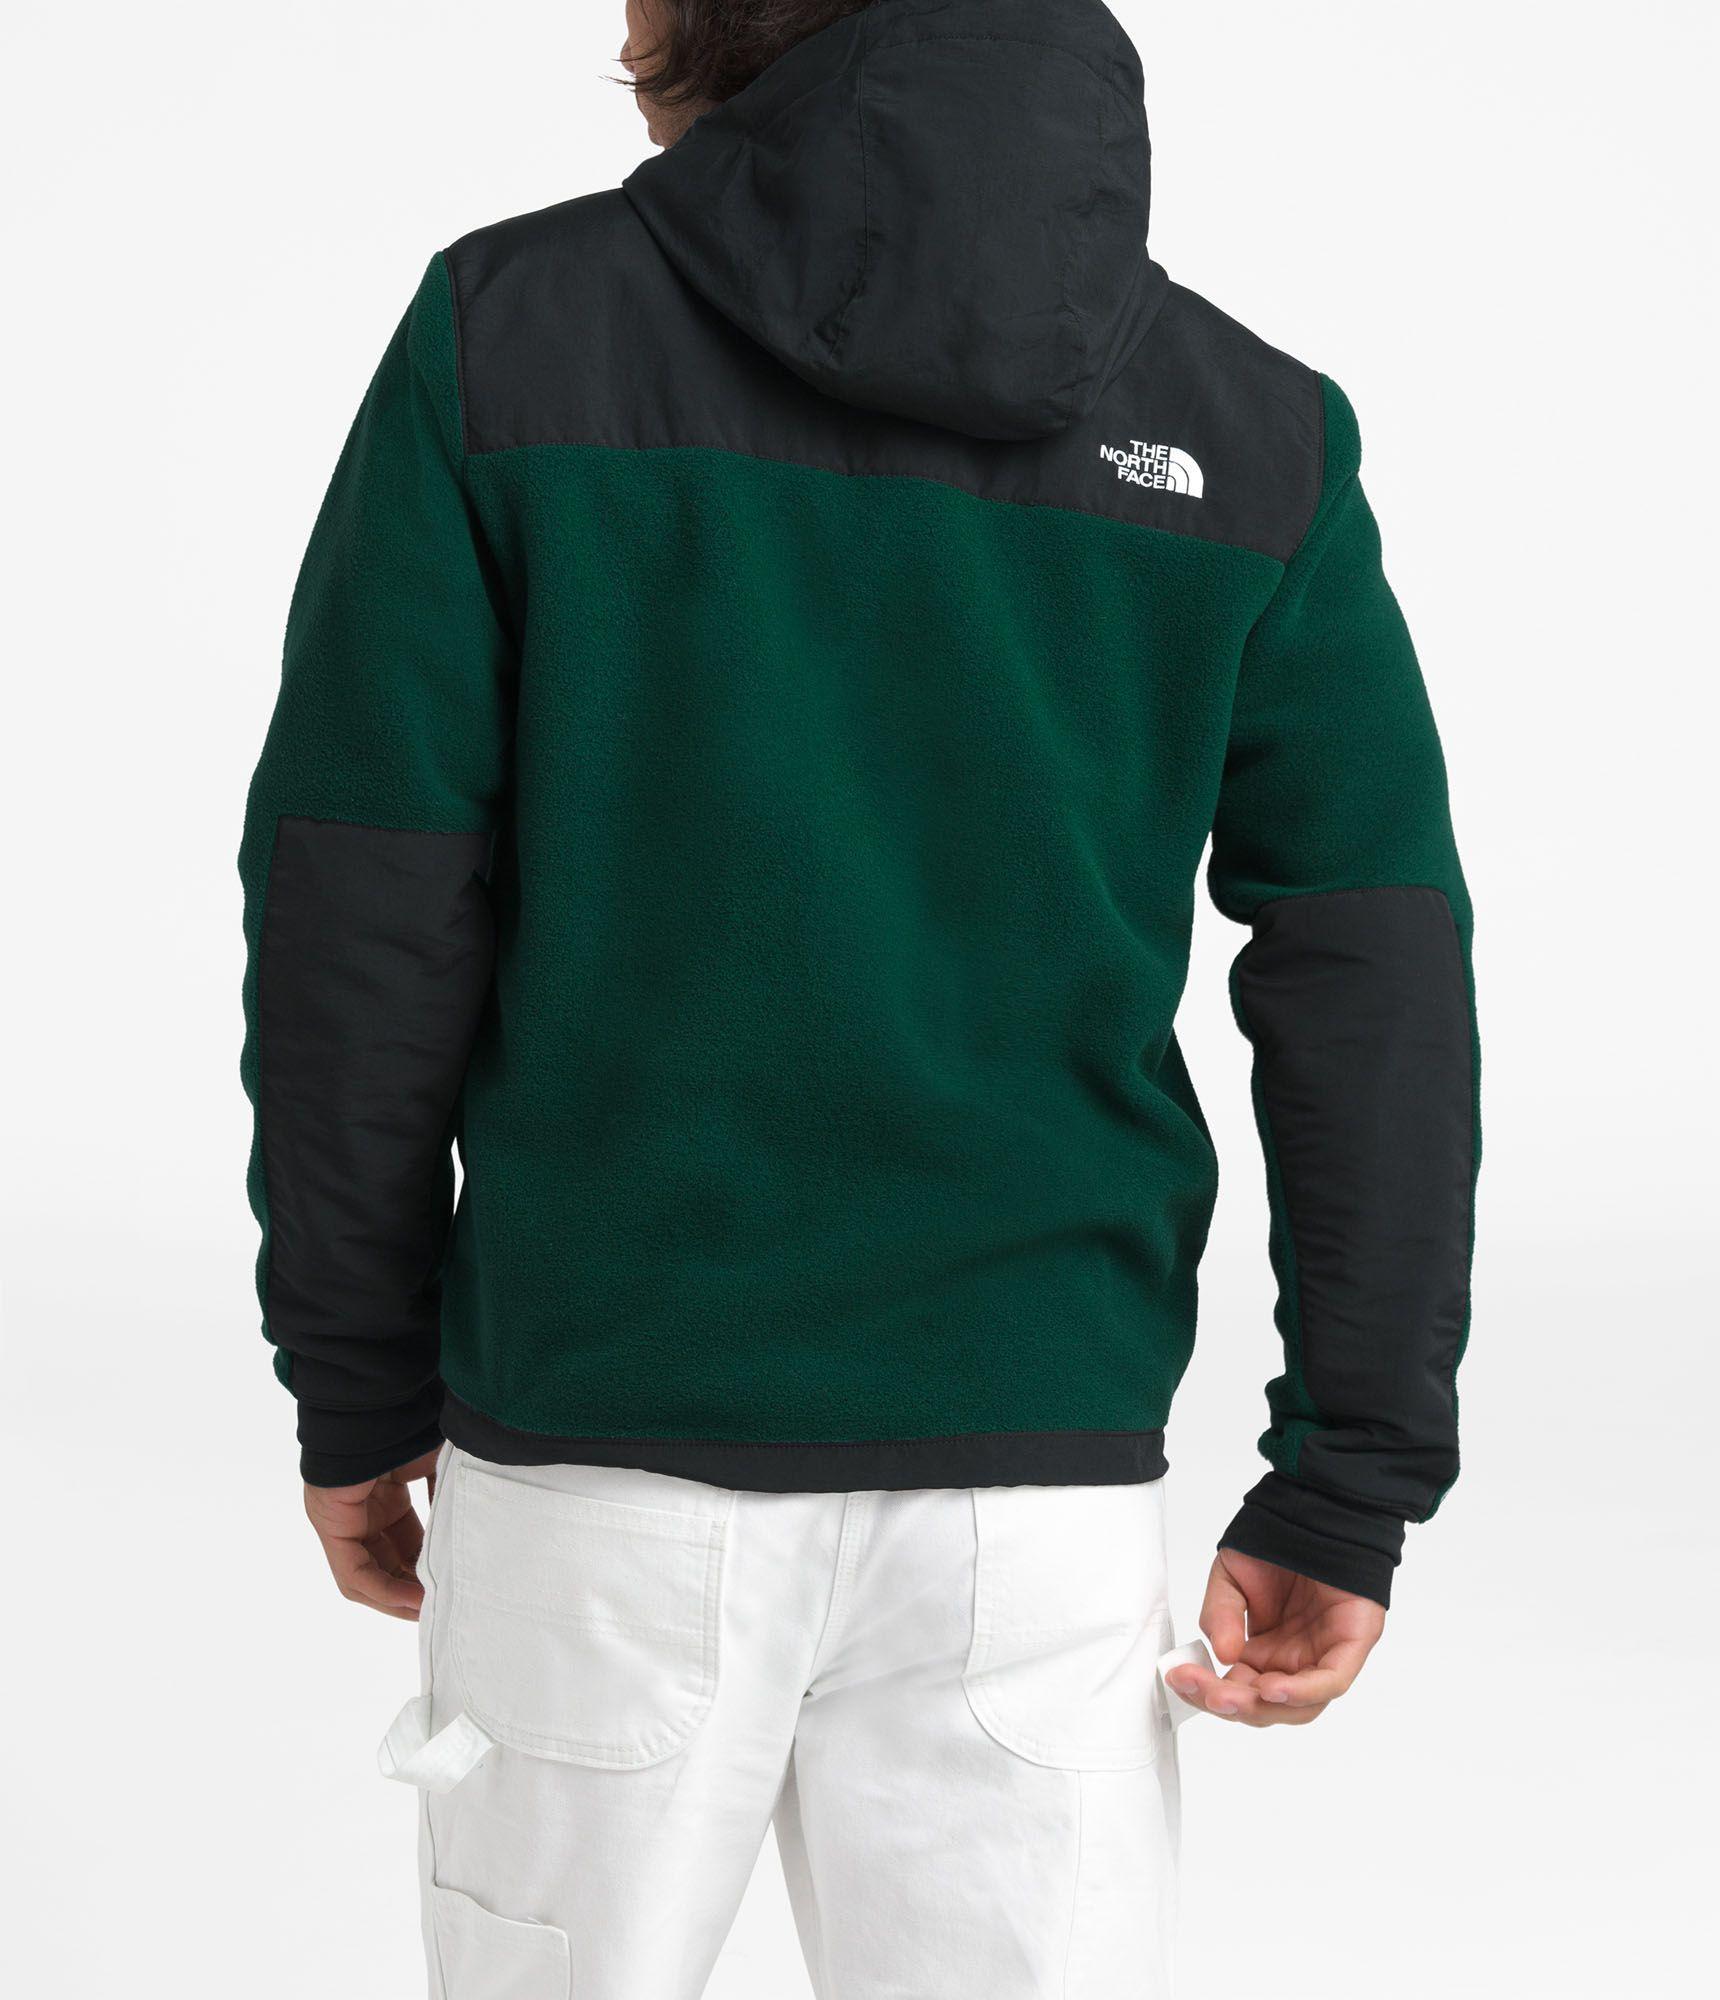 The North Face Denali 2 Fleece Hoodie in Night Green (Green) for Men - Lyst